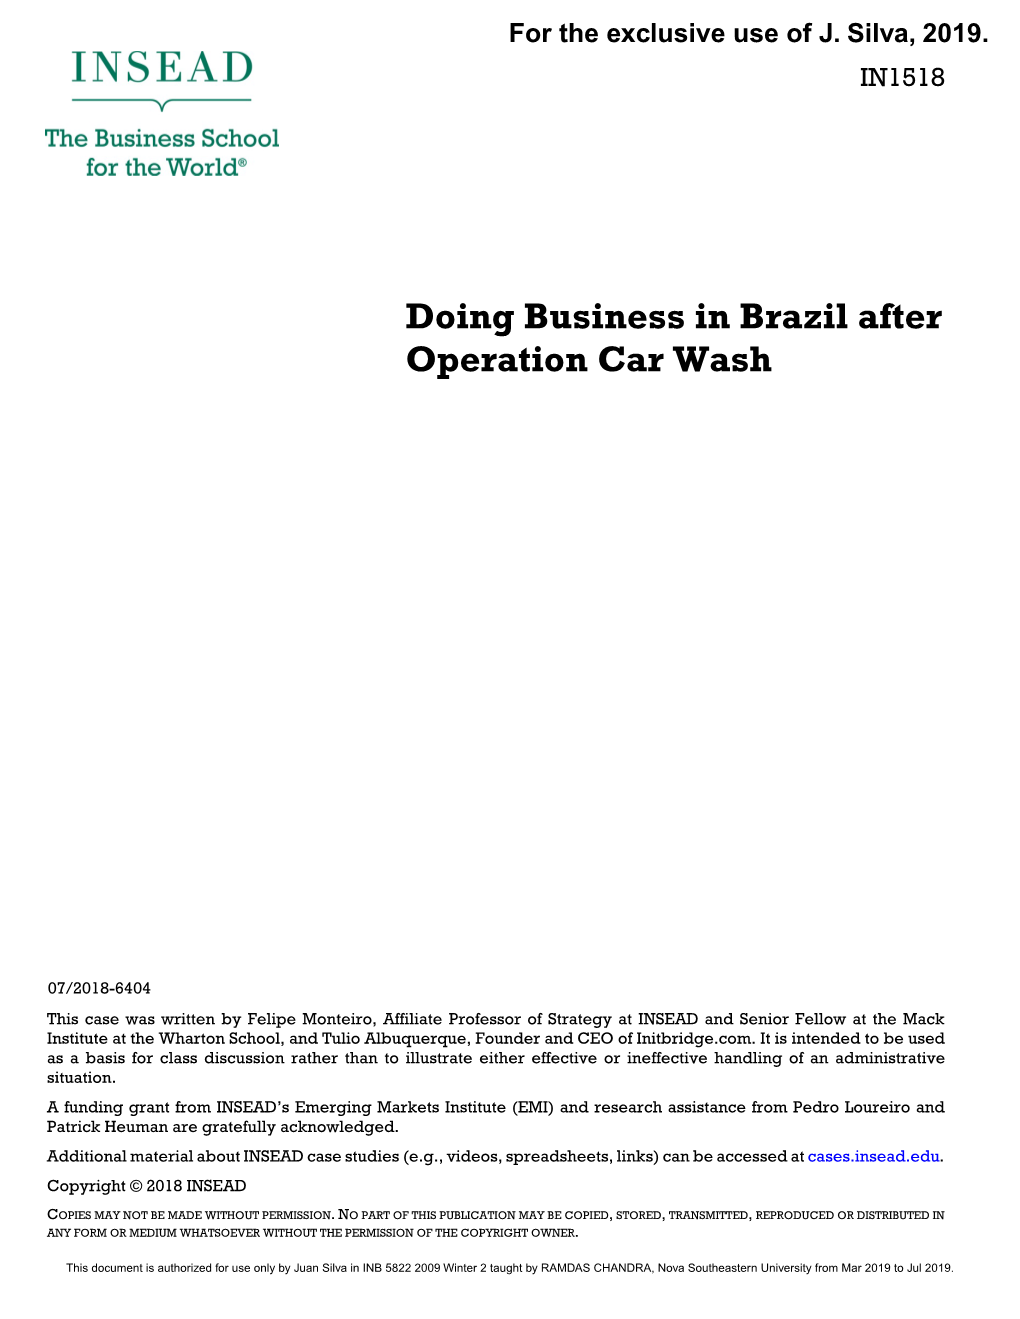 Doing Business in Brazil After Operation Car Wash